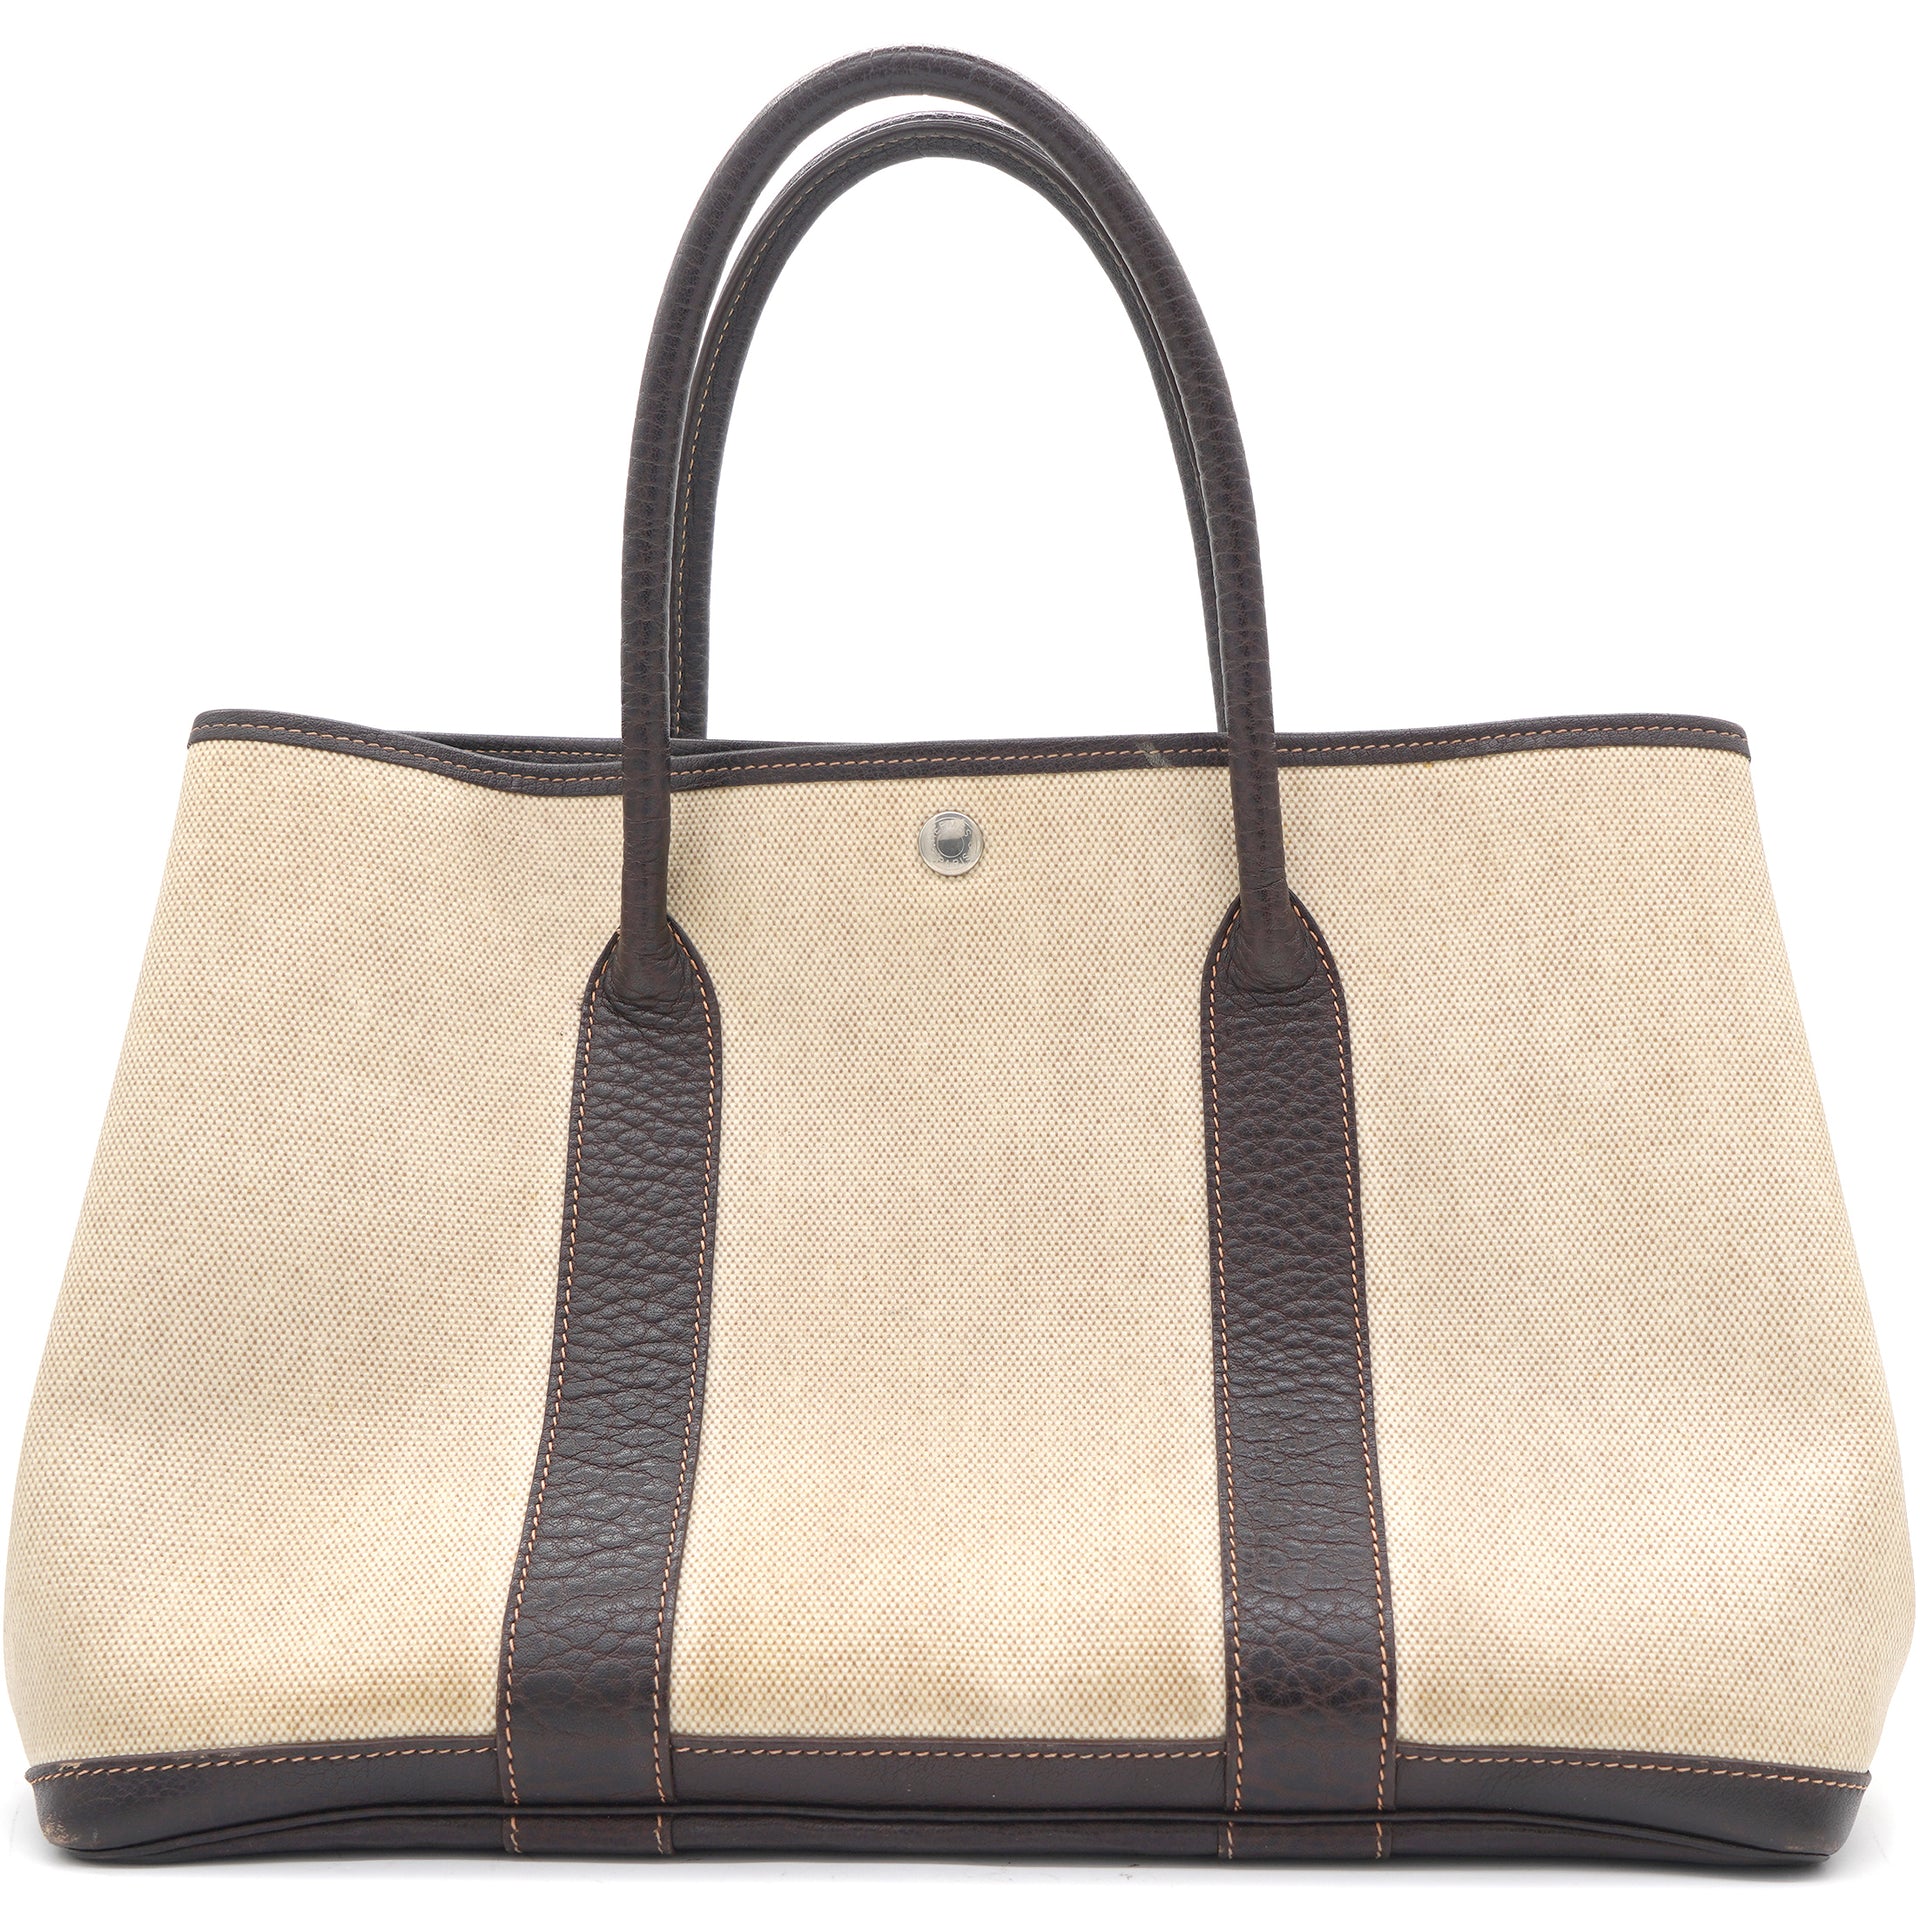 Hermes Canvas Leather Garden Party Tote Bag Hermes